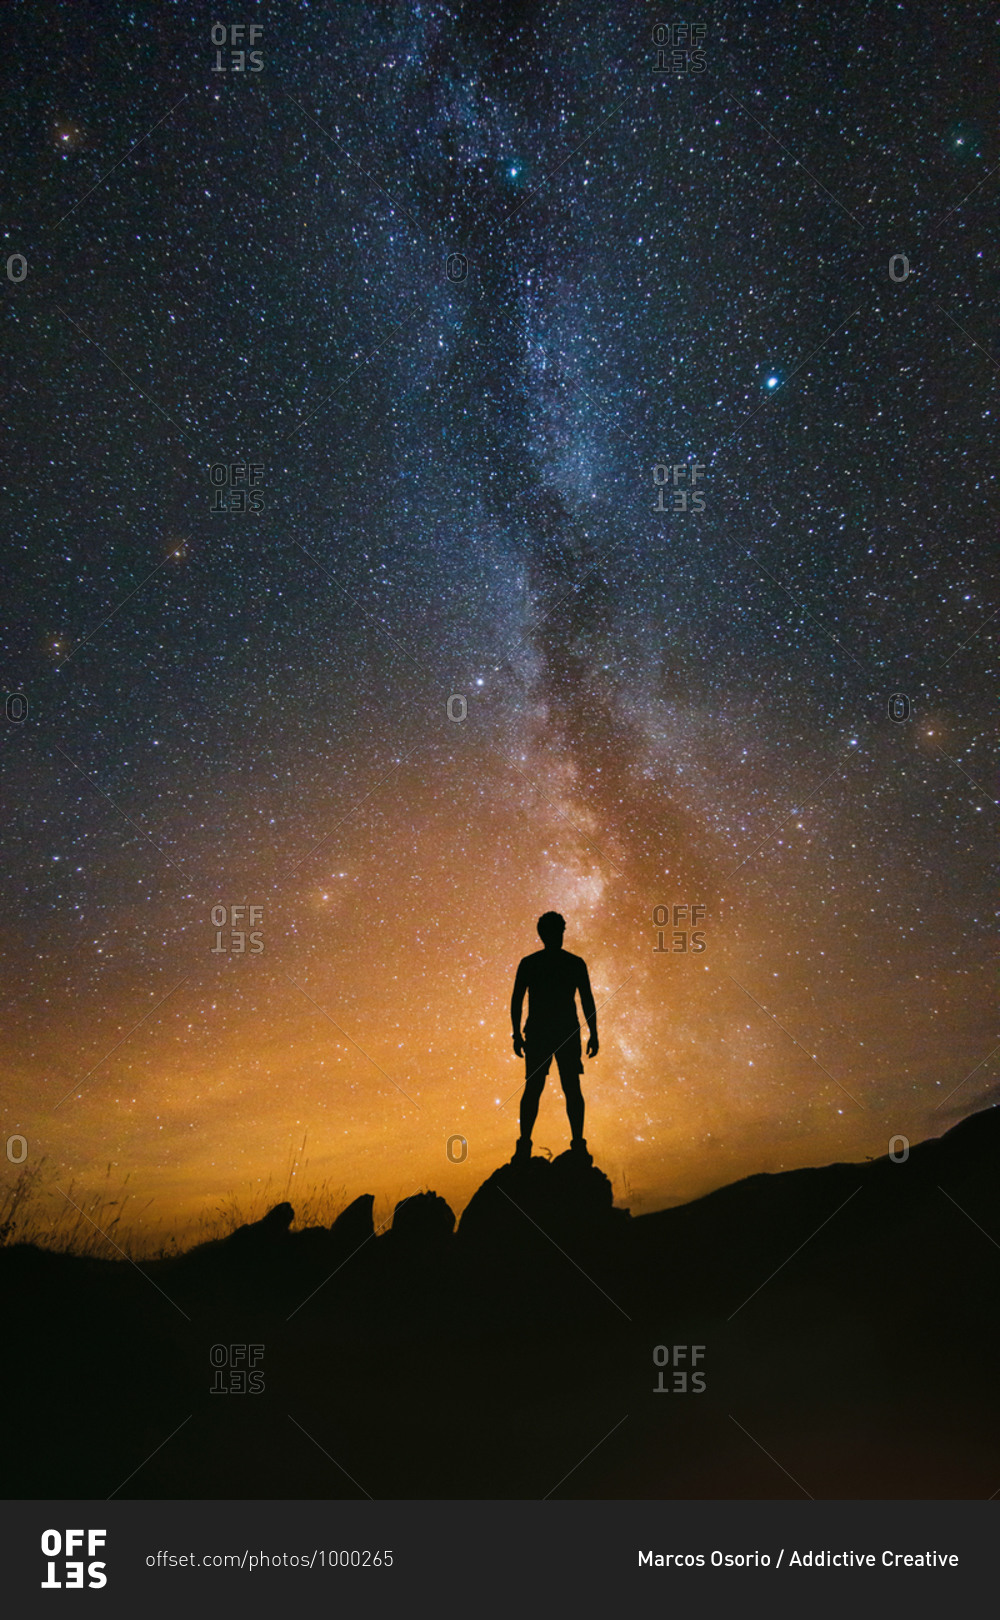 Man observing the night sky with the Milky Way in the background